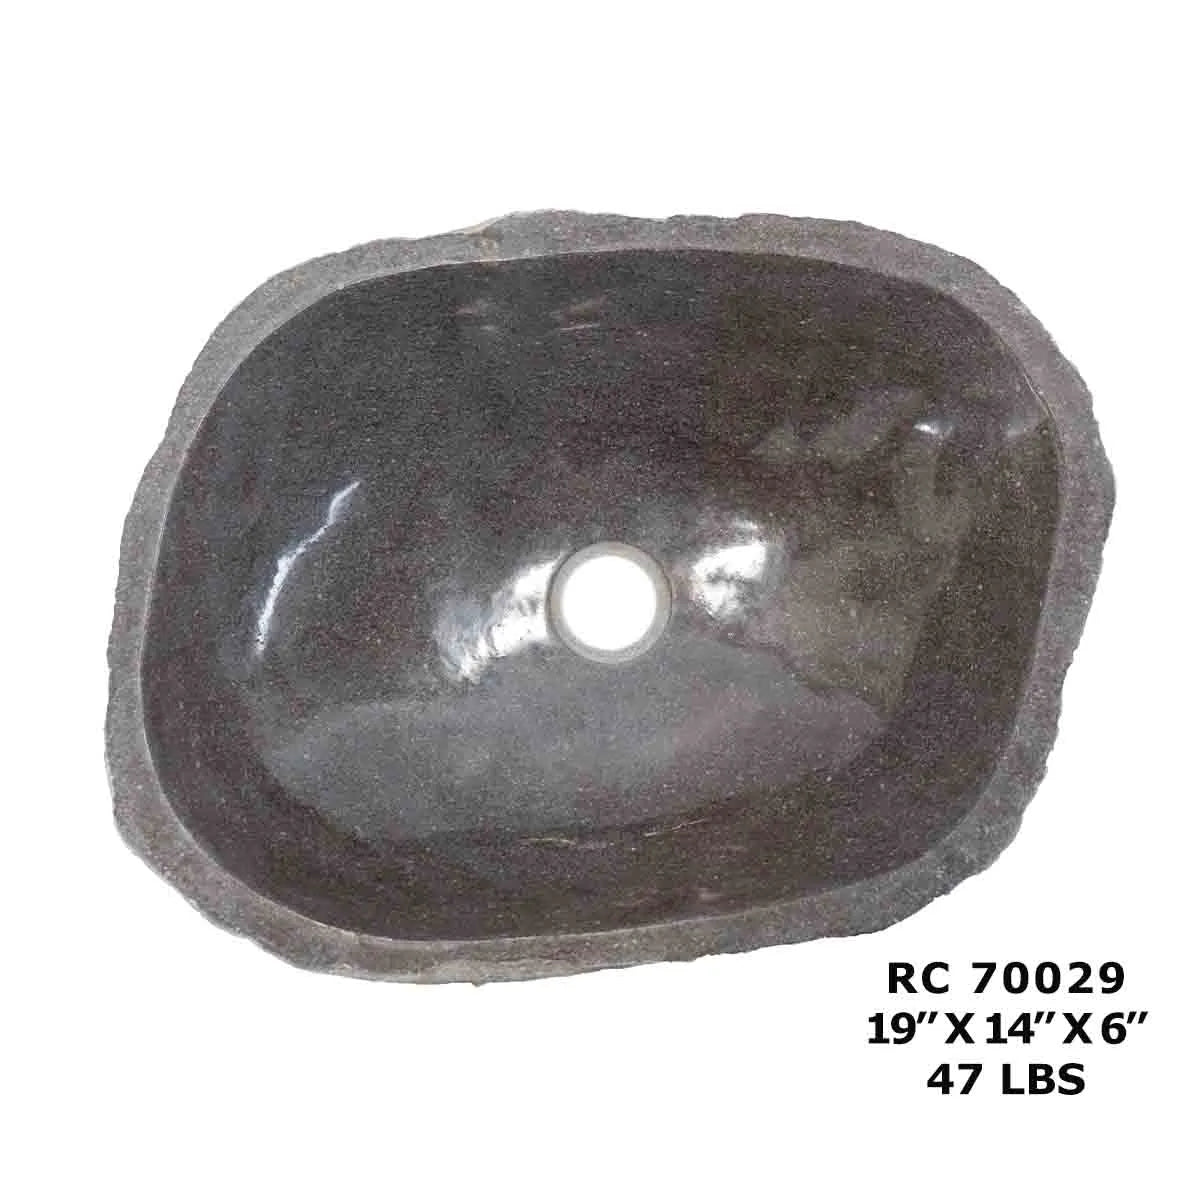 RC70029-Natural River Stone Oval Vessel Sink for Bathroom